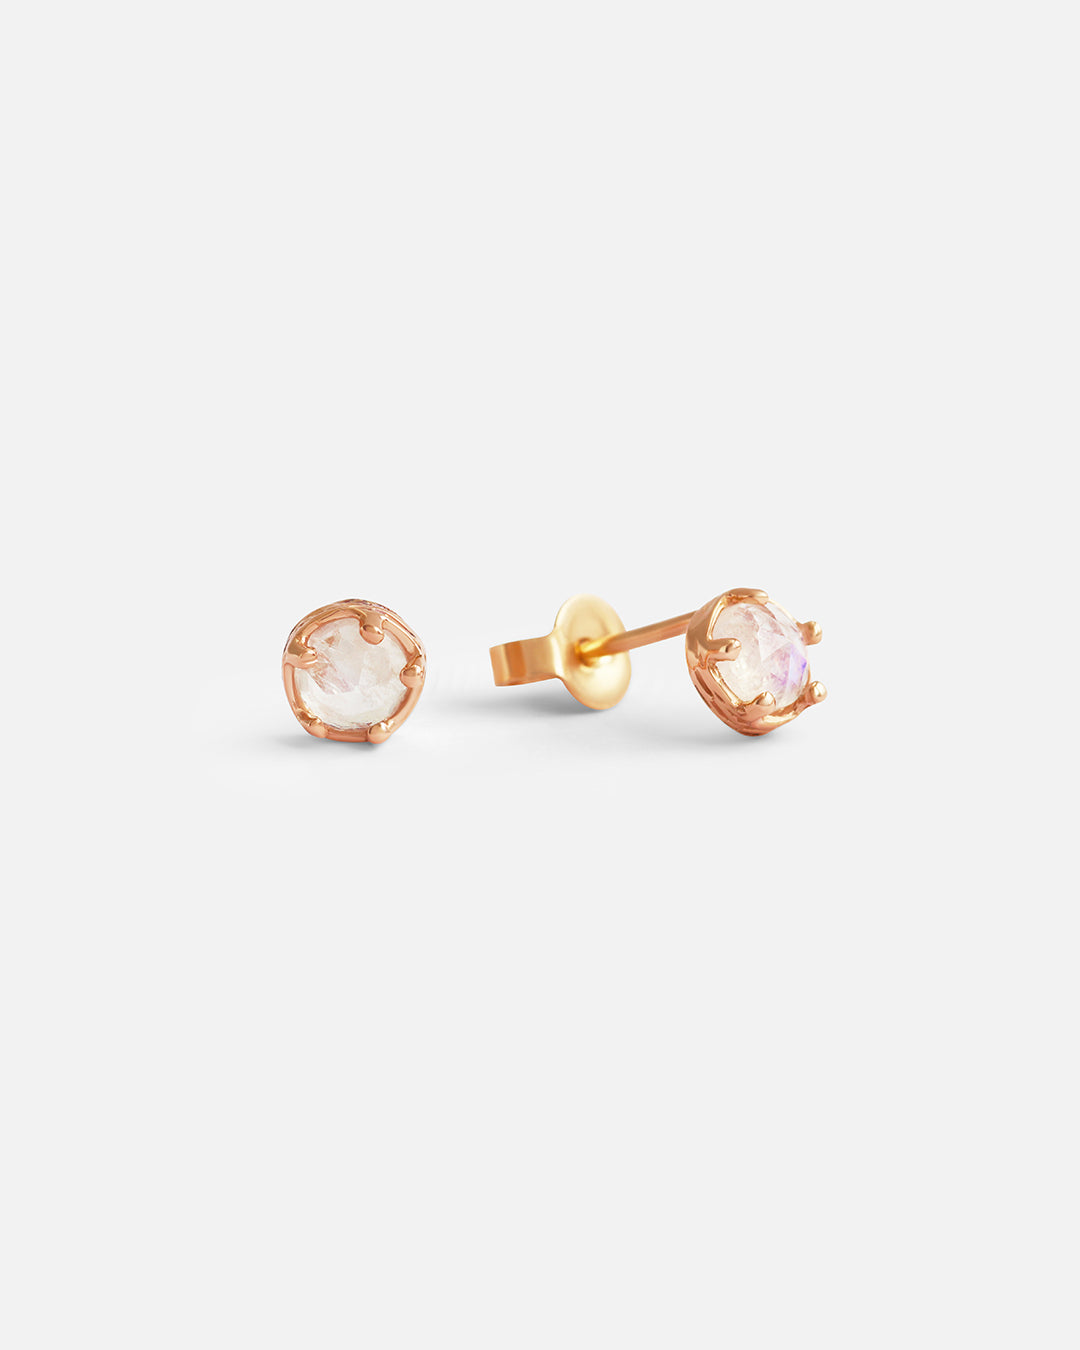 Front and side view of Moonstone / Rose Gold Studs by Ariko